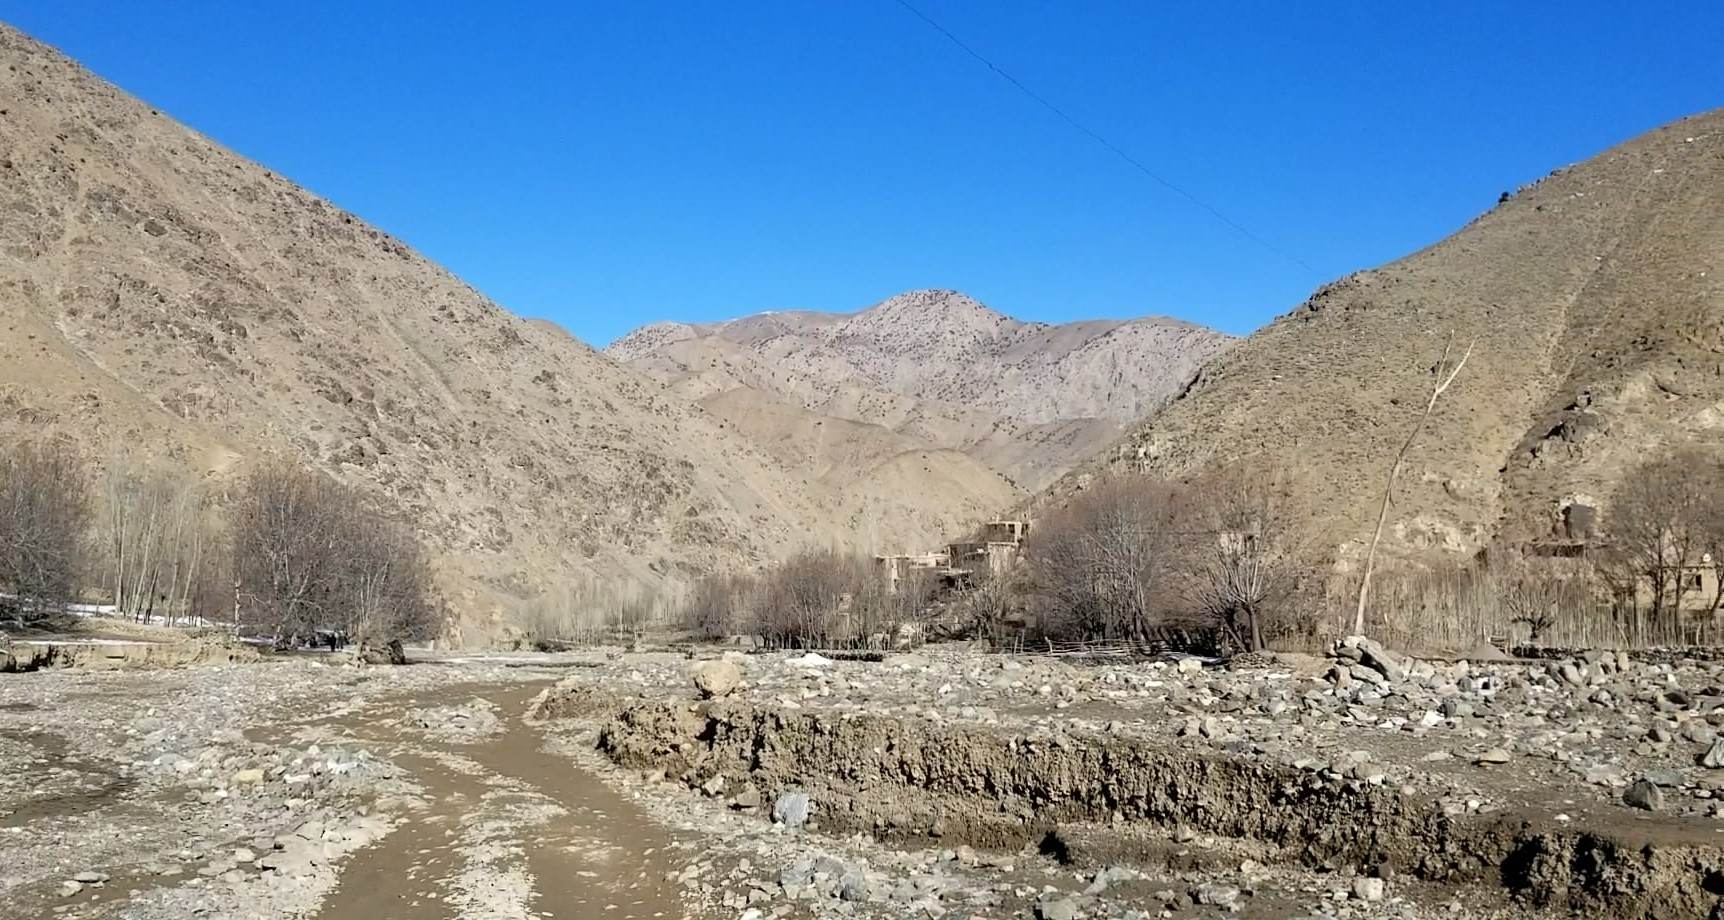 Falol residents in Baghlan’s Burka district lost access to drinking water